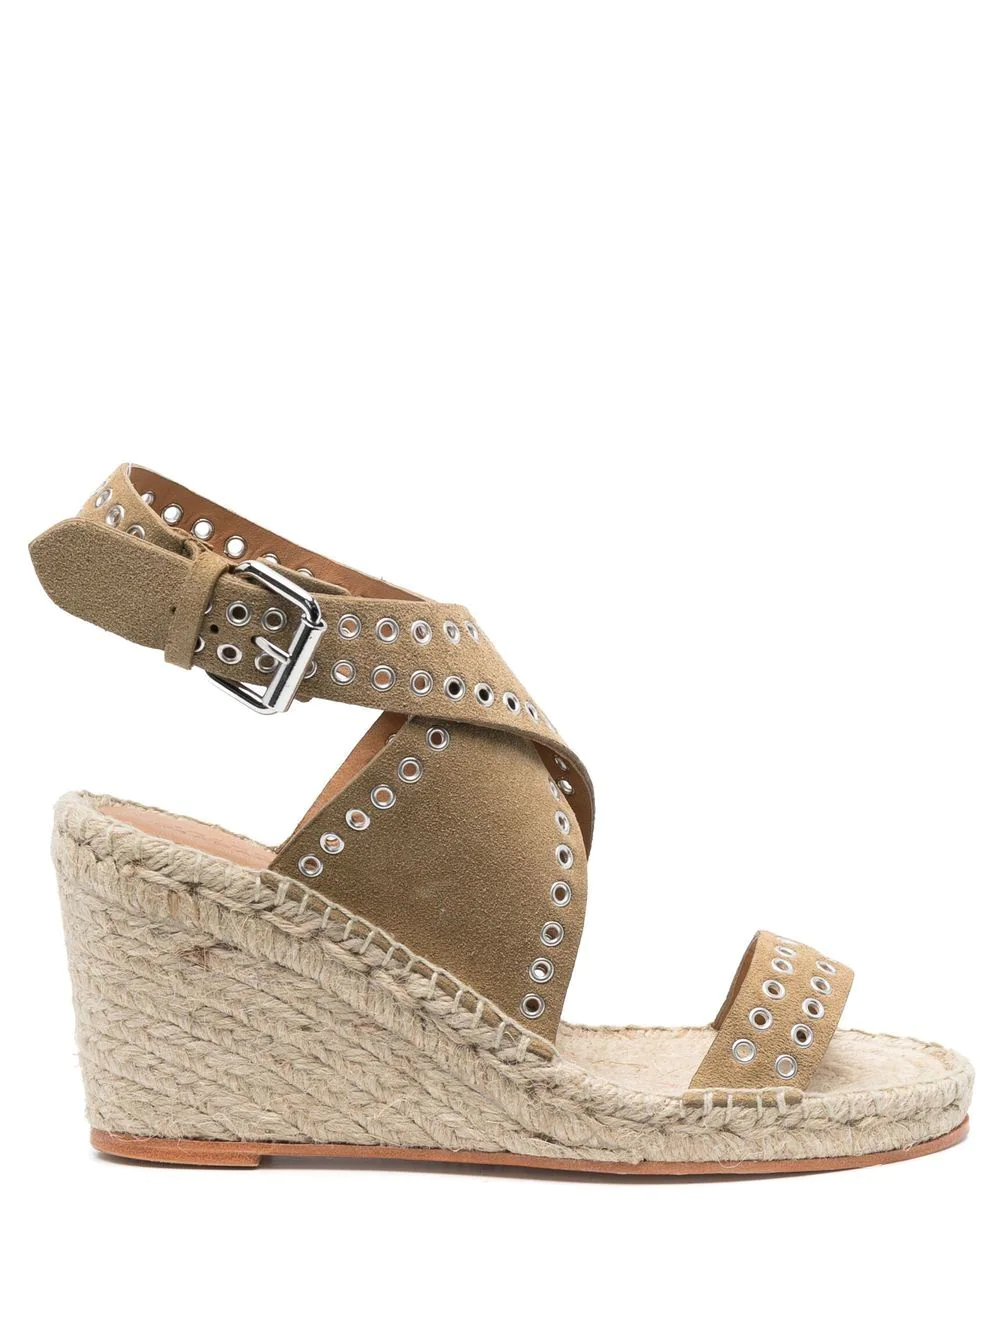 ISABEL MARANT ESPADRILLES WITH 70MM WEDGE